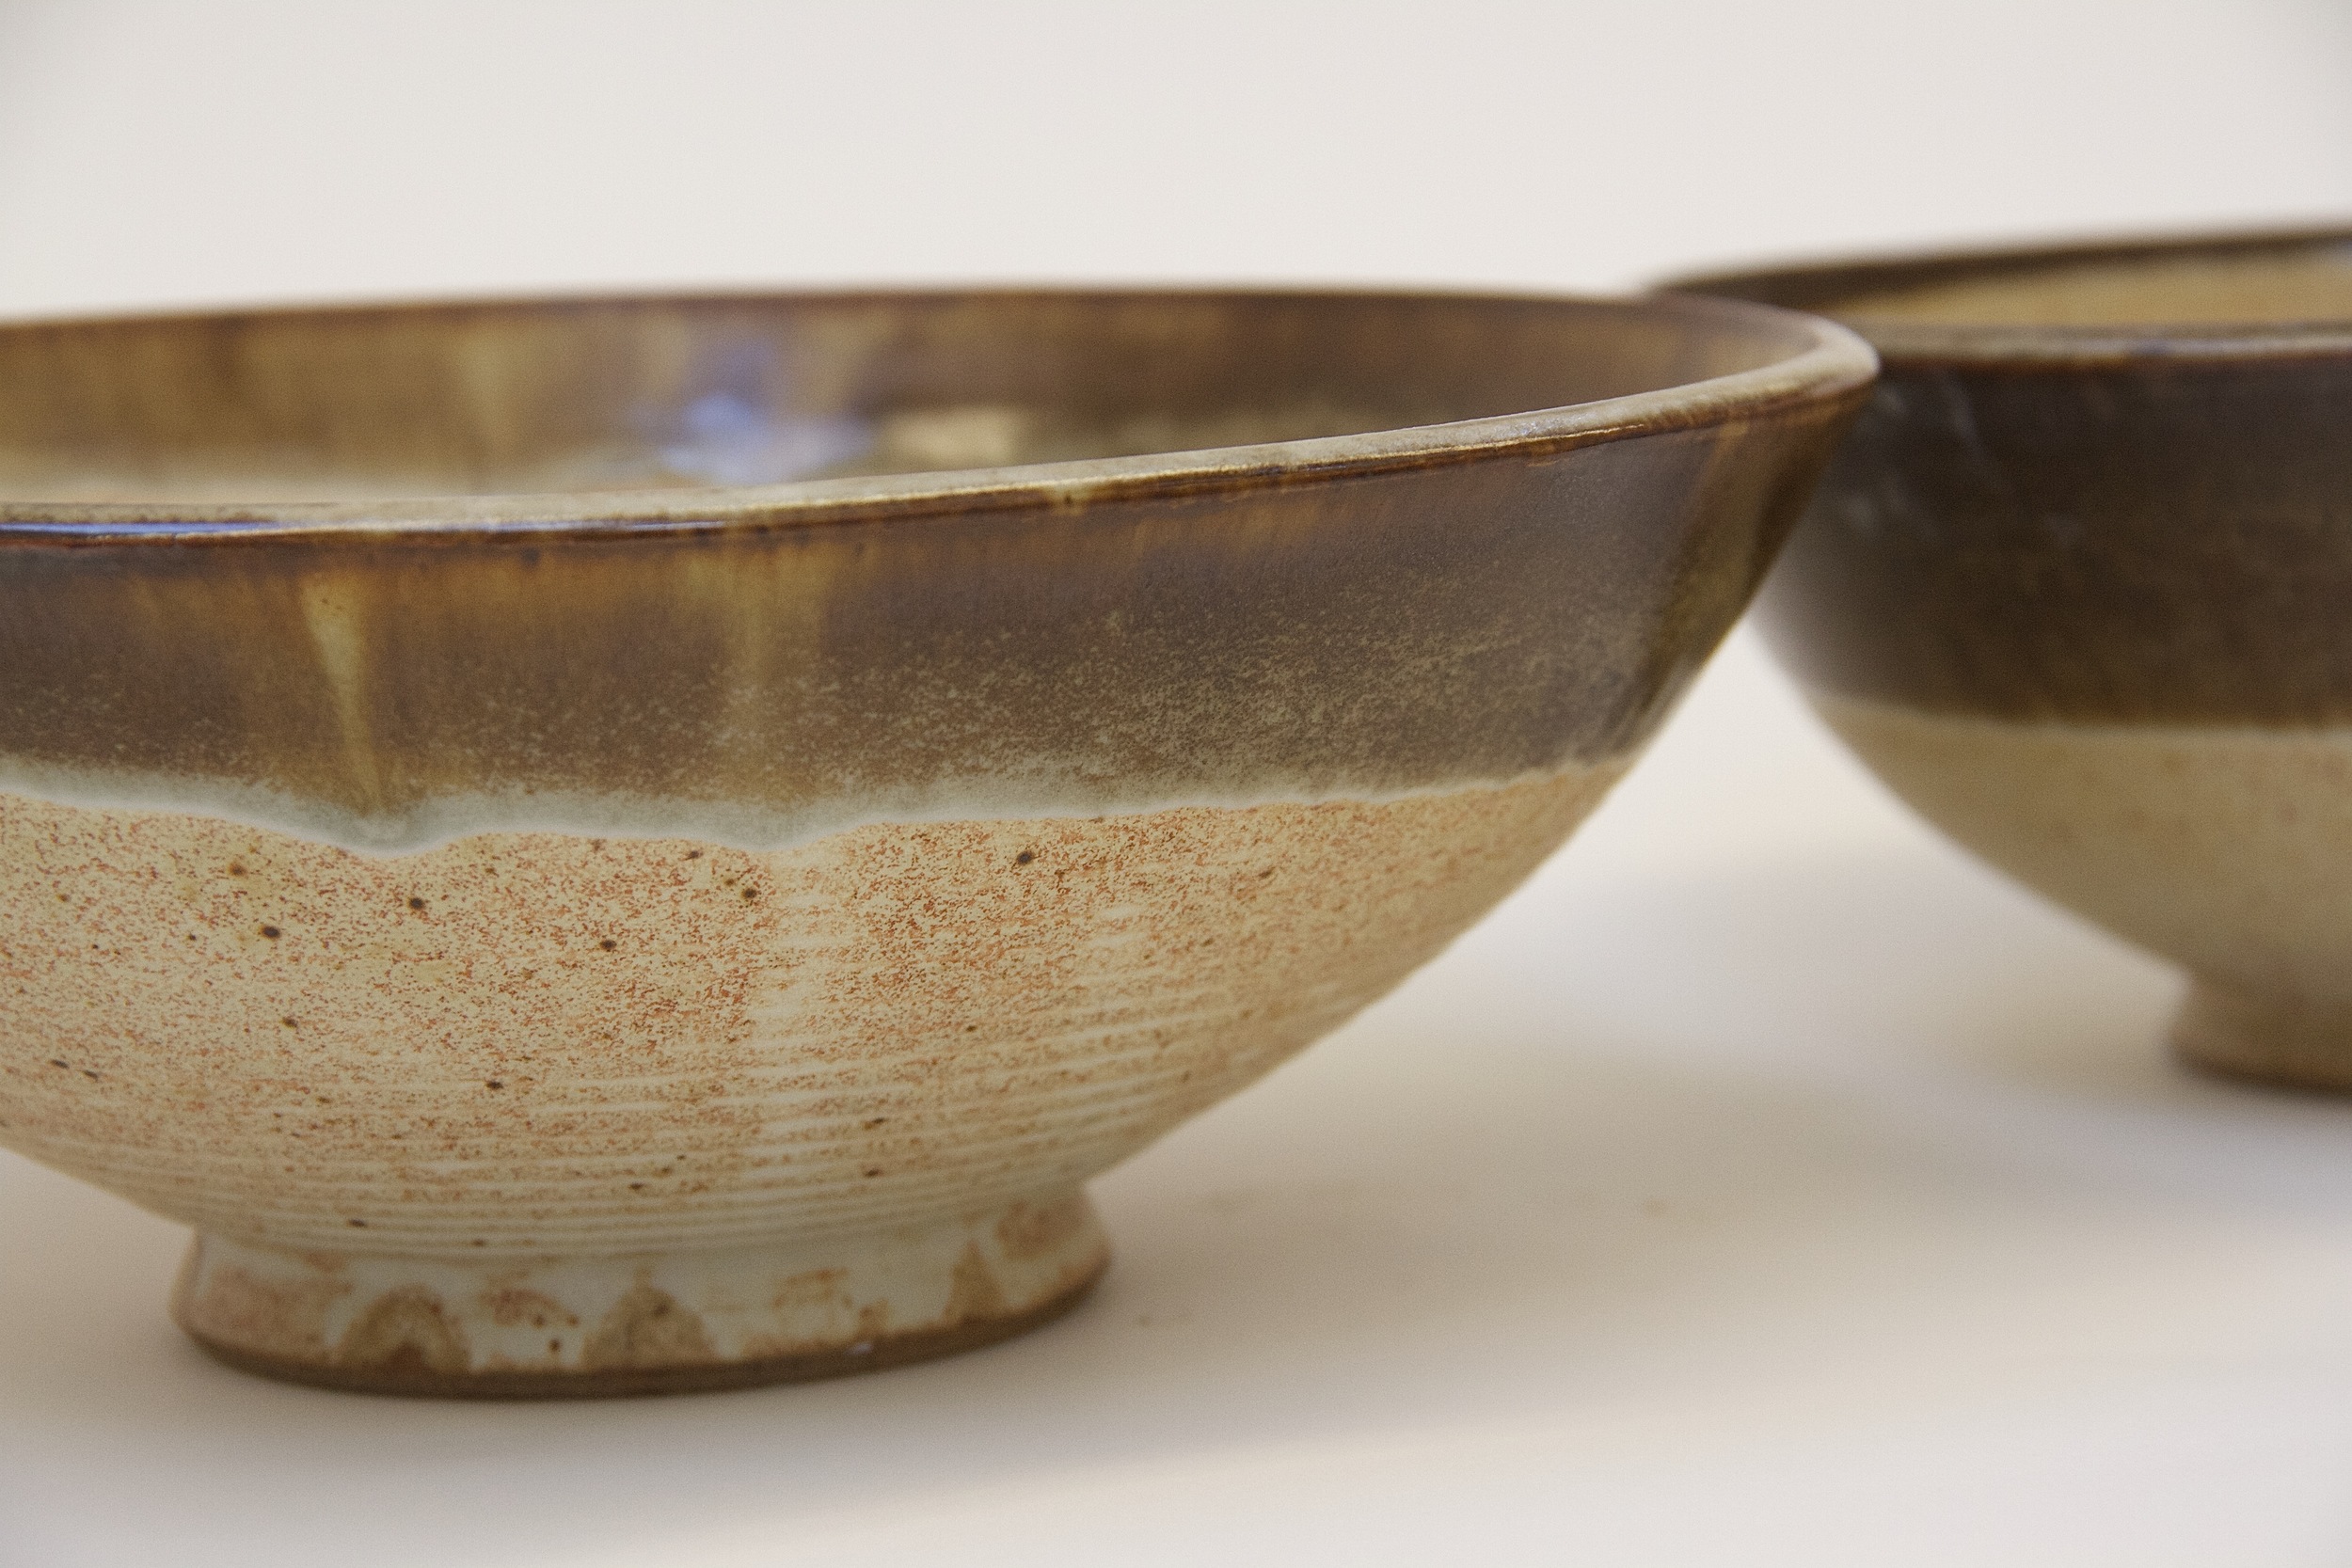 Amber and sandy colored glazed ceramic bowls in Dublin IR Shannon May Mackenzie